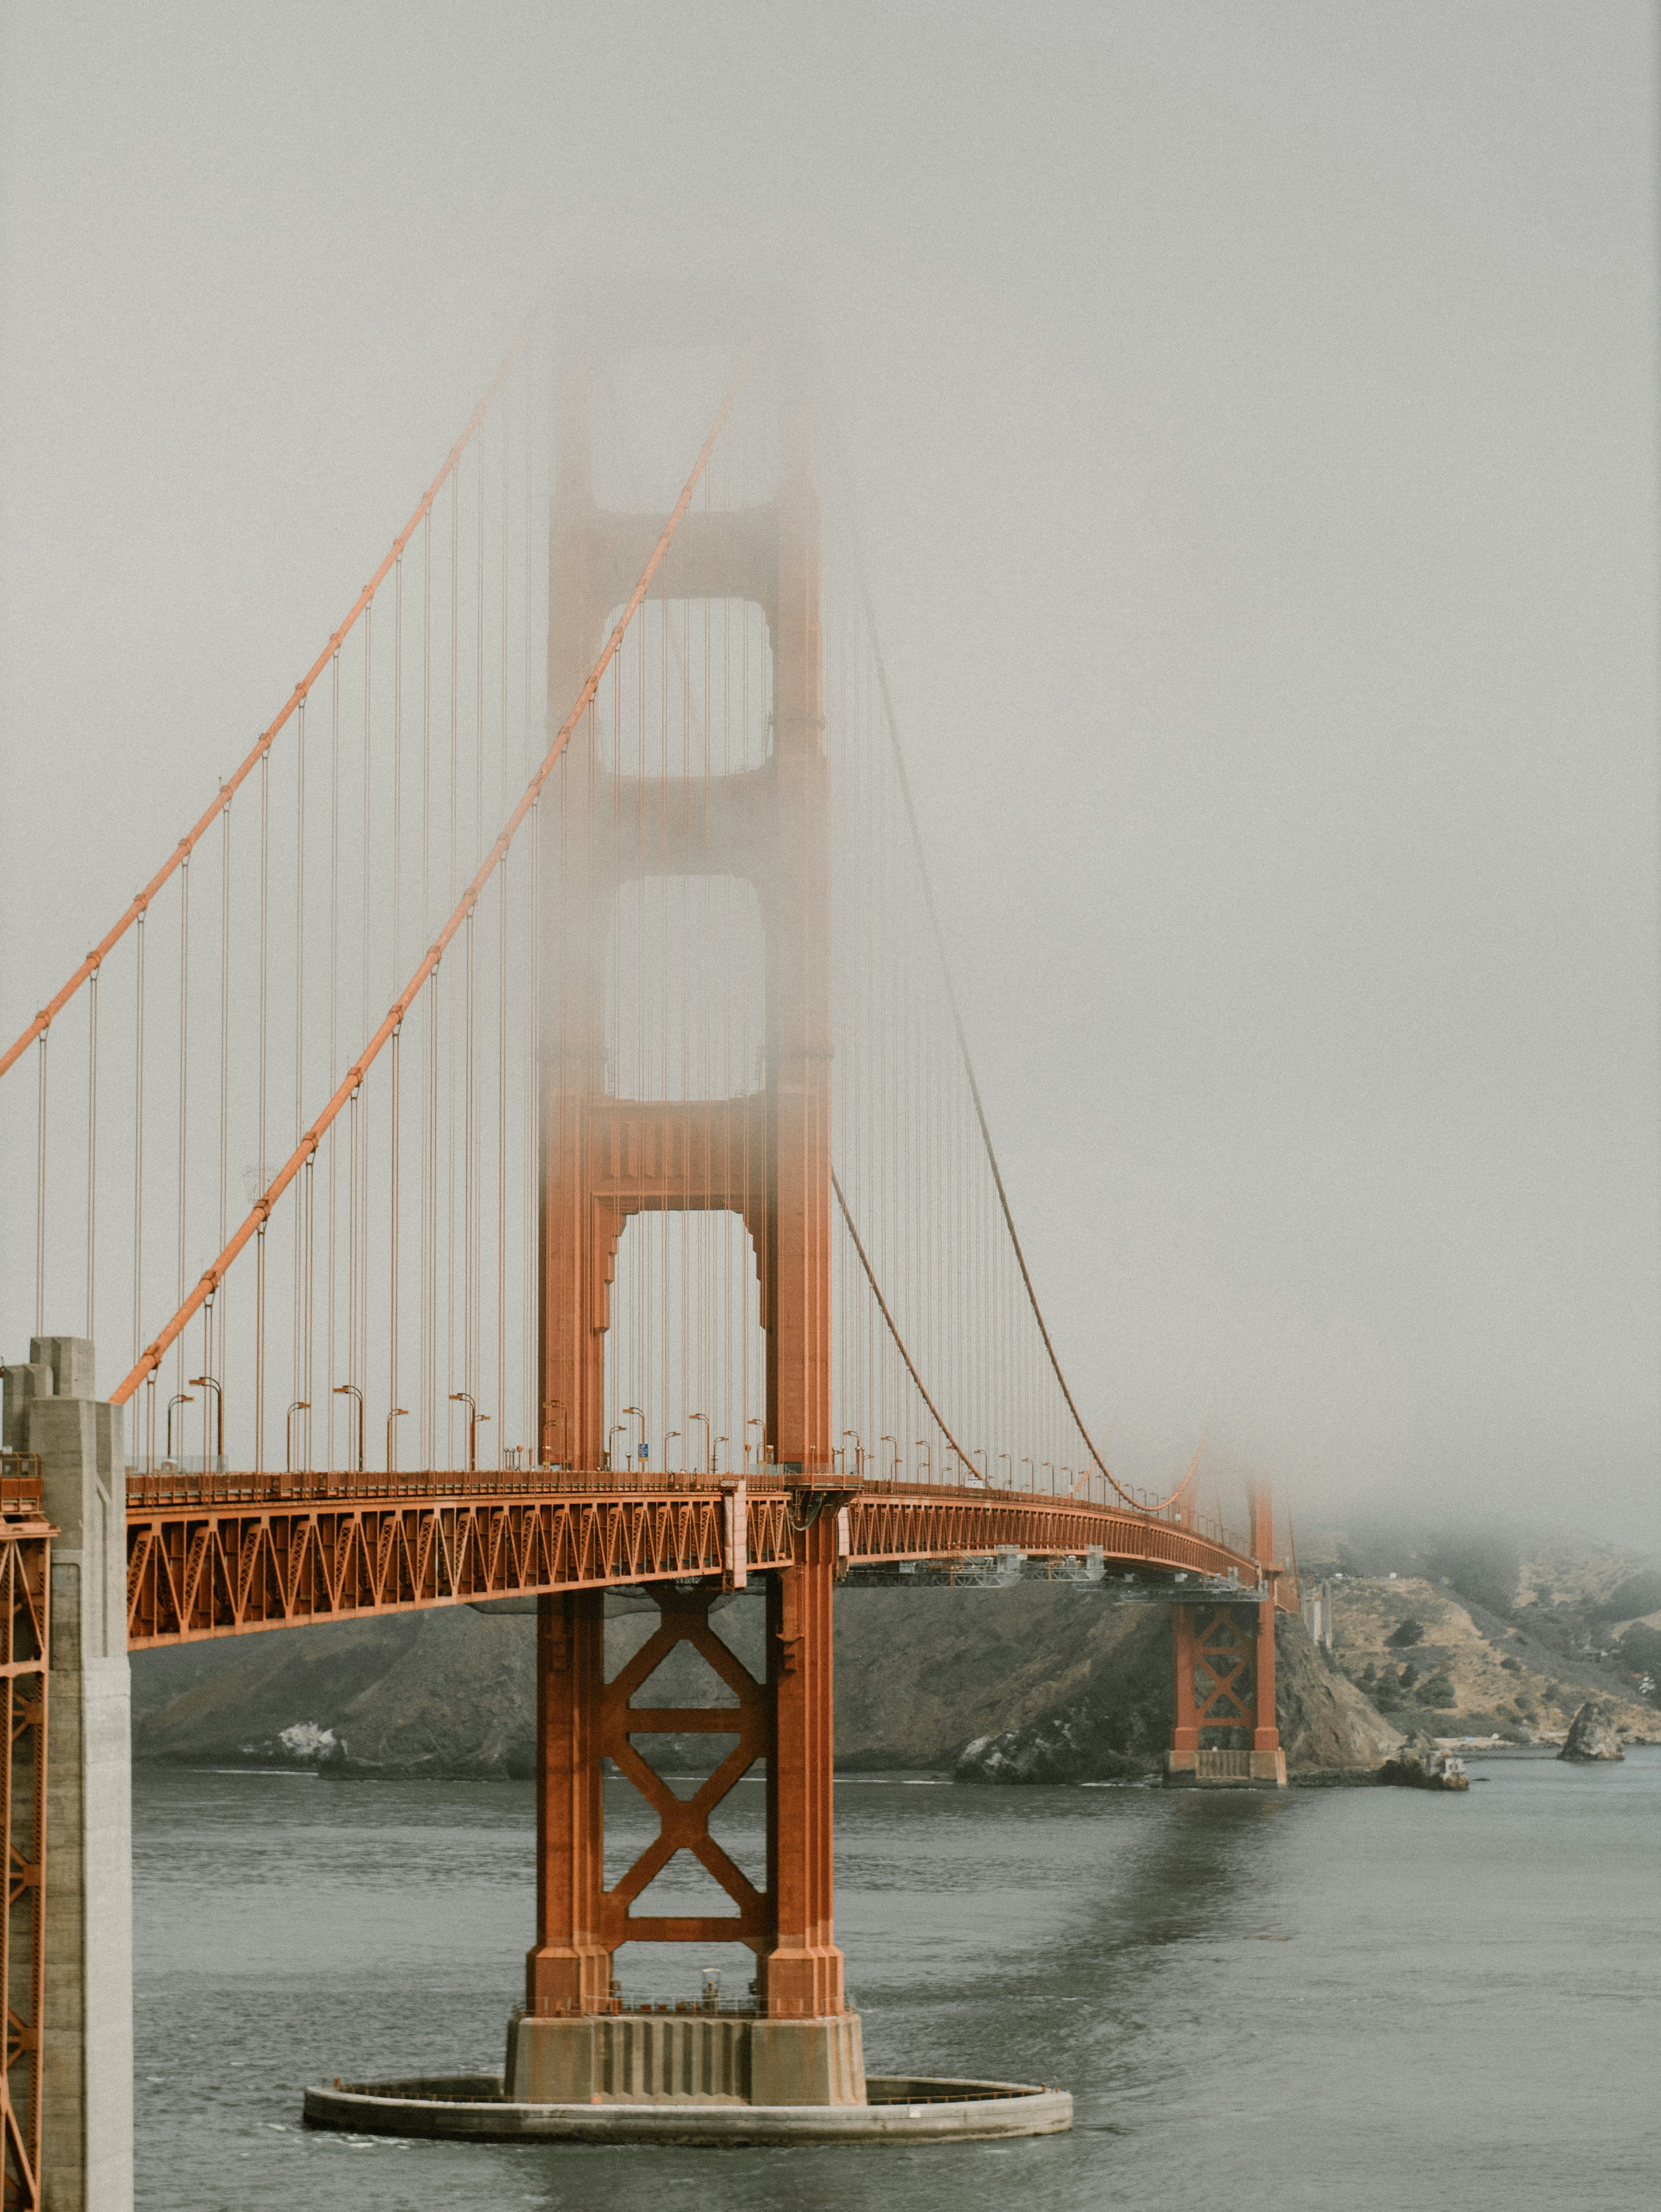 Tower of the Golden Gate Bridge disappearing in the fog, San Francisco